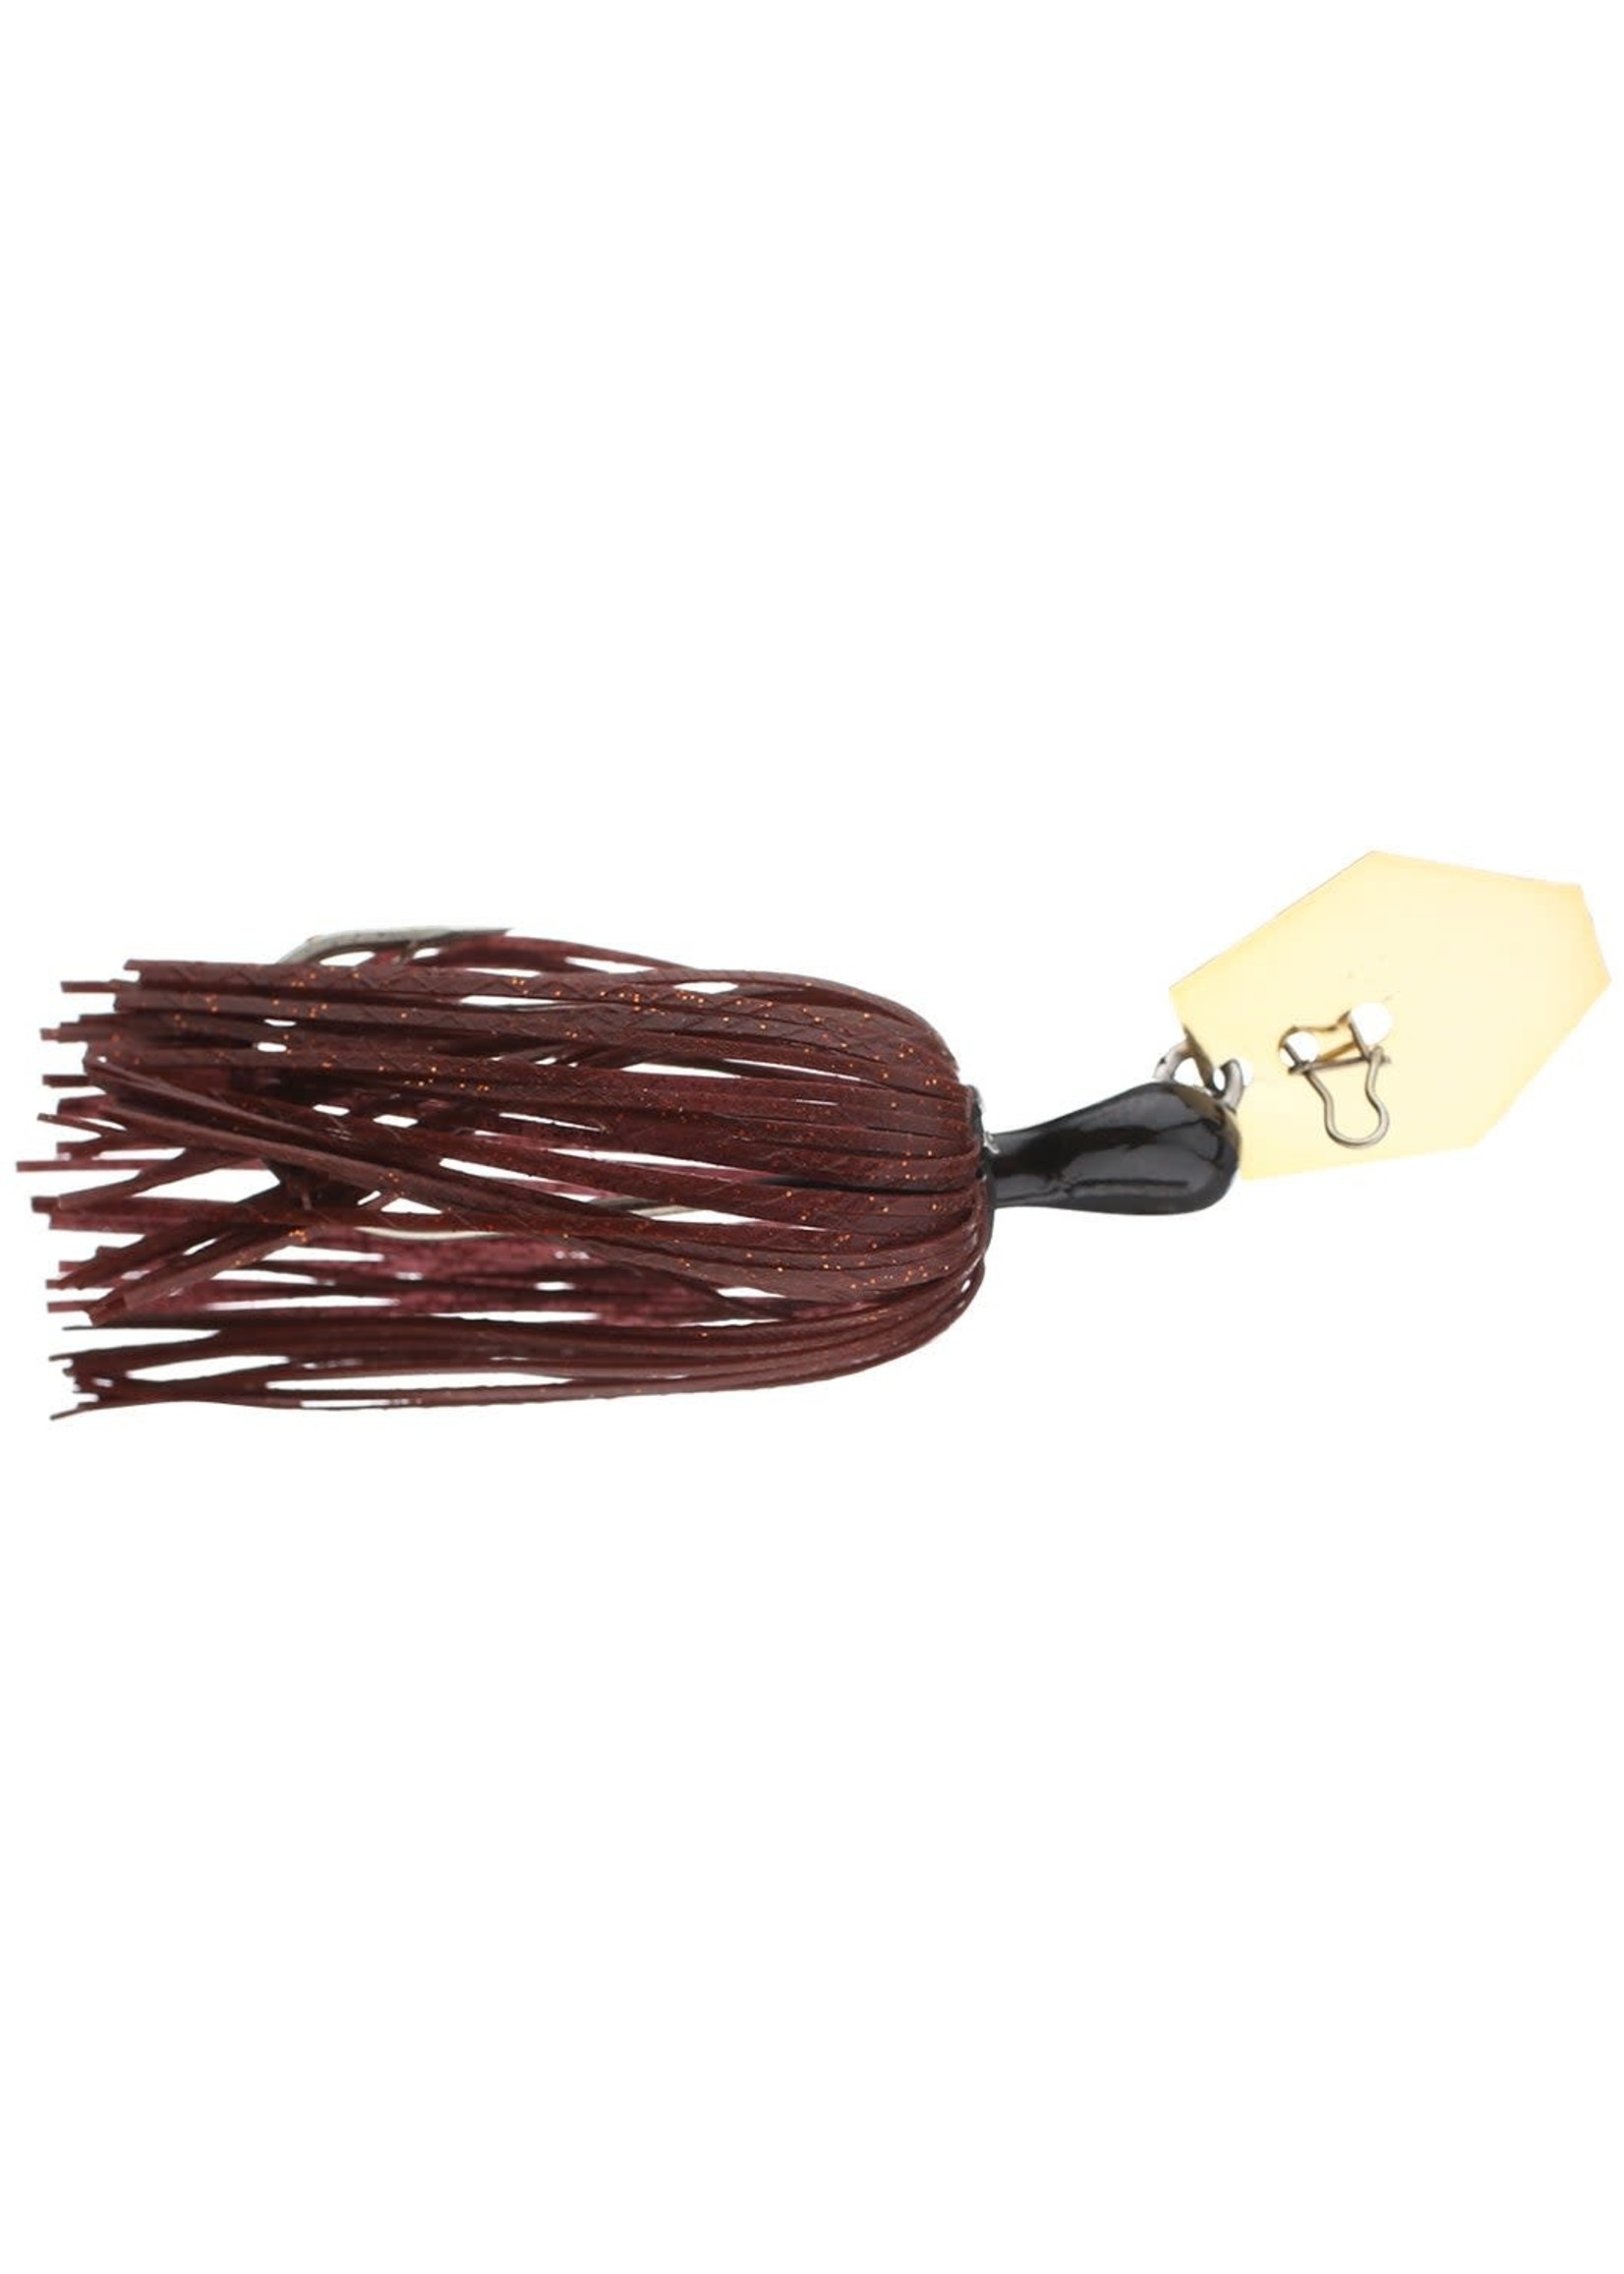 ZMAN CHATTERBAIT MINIMAX - Rugged Shoal Outfitters